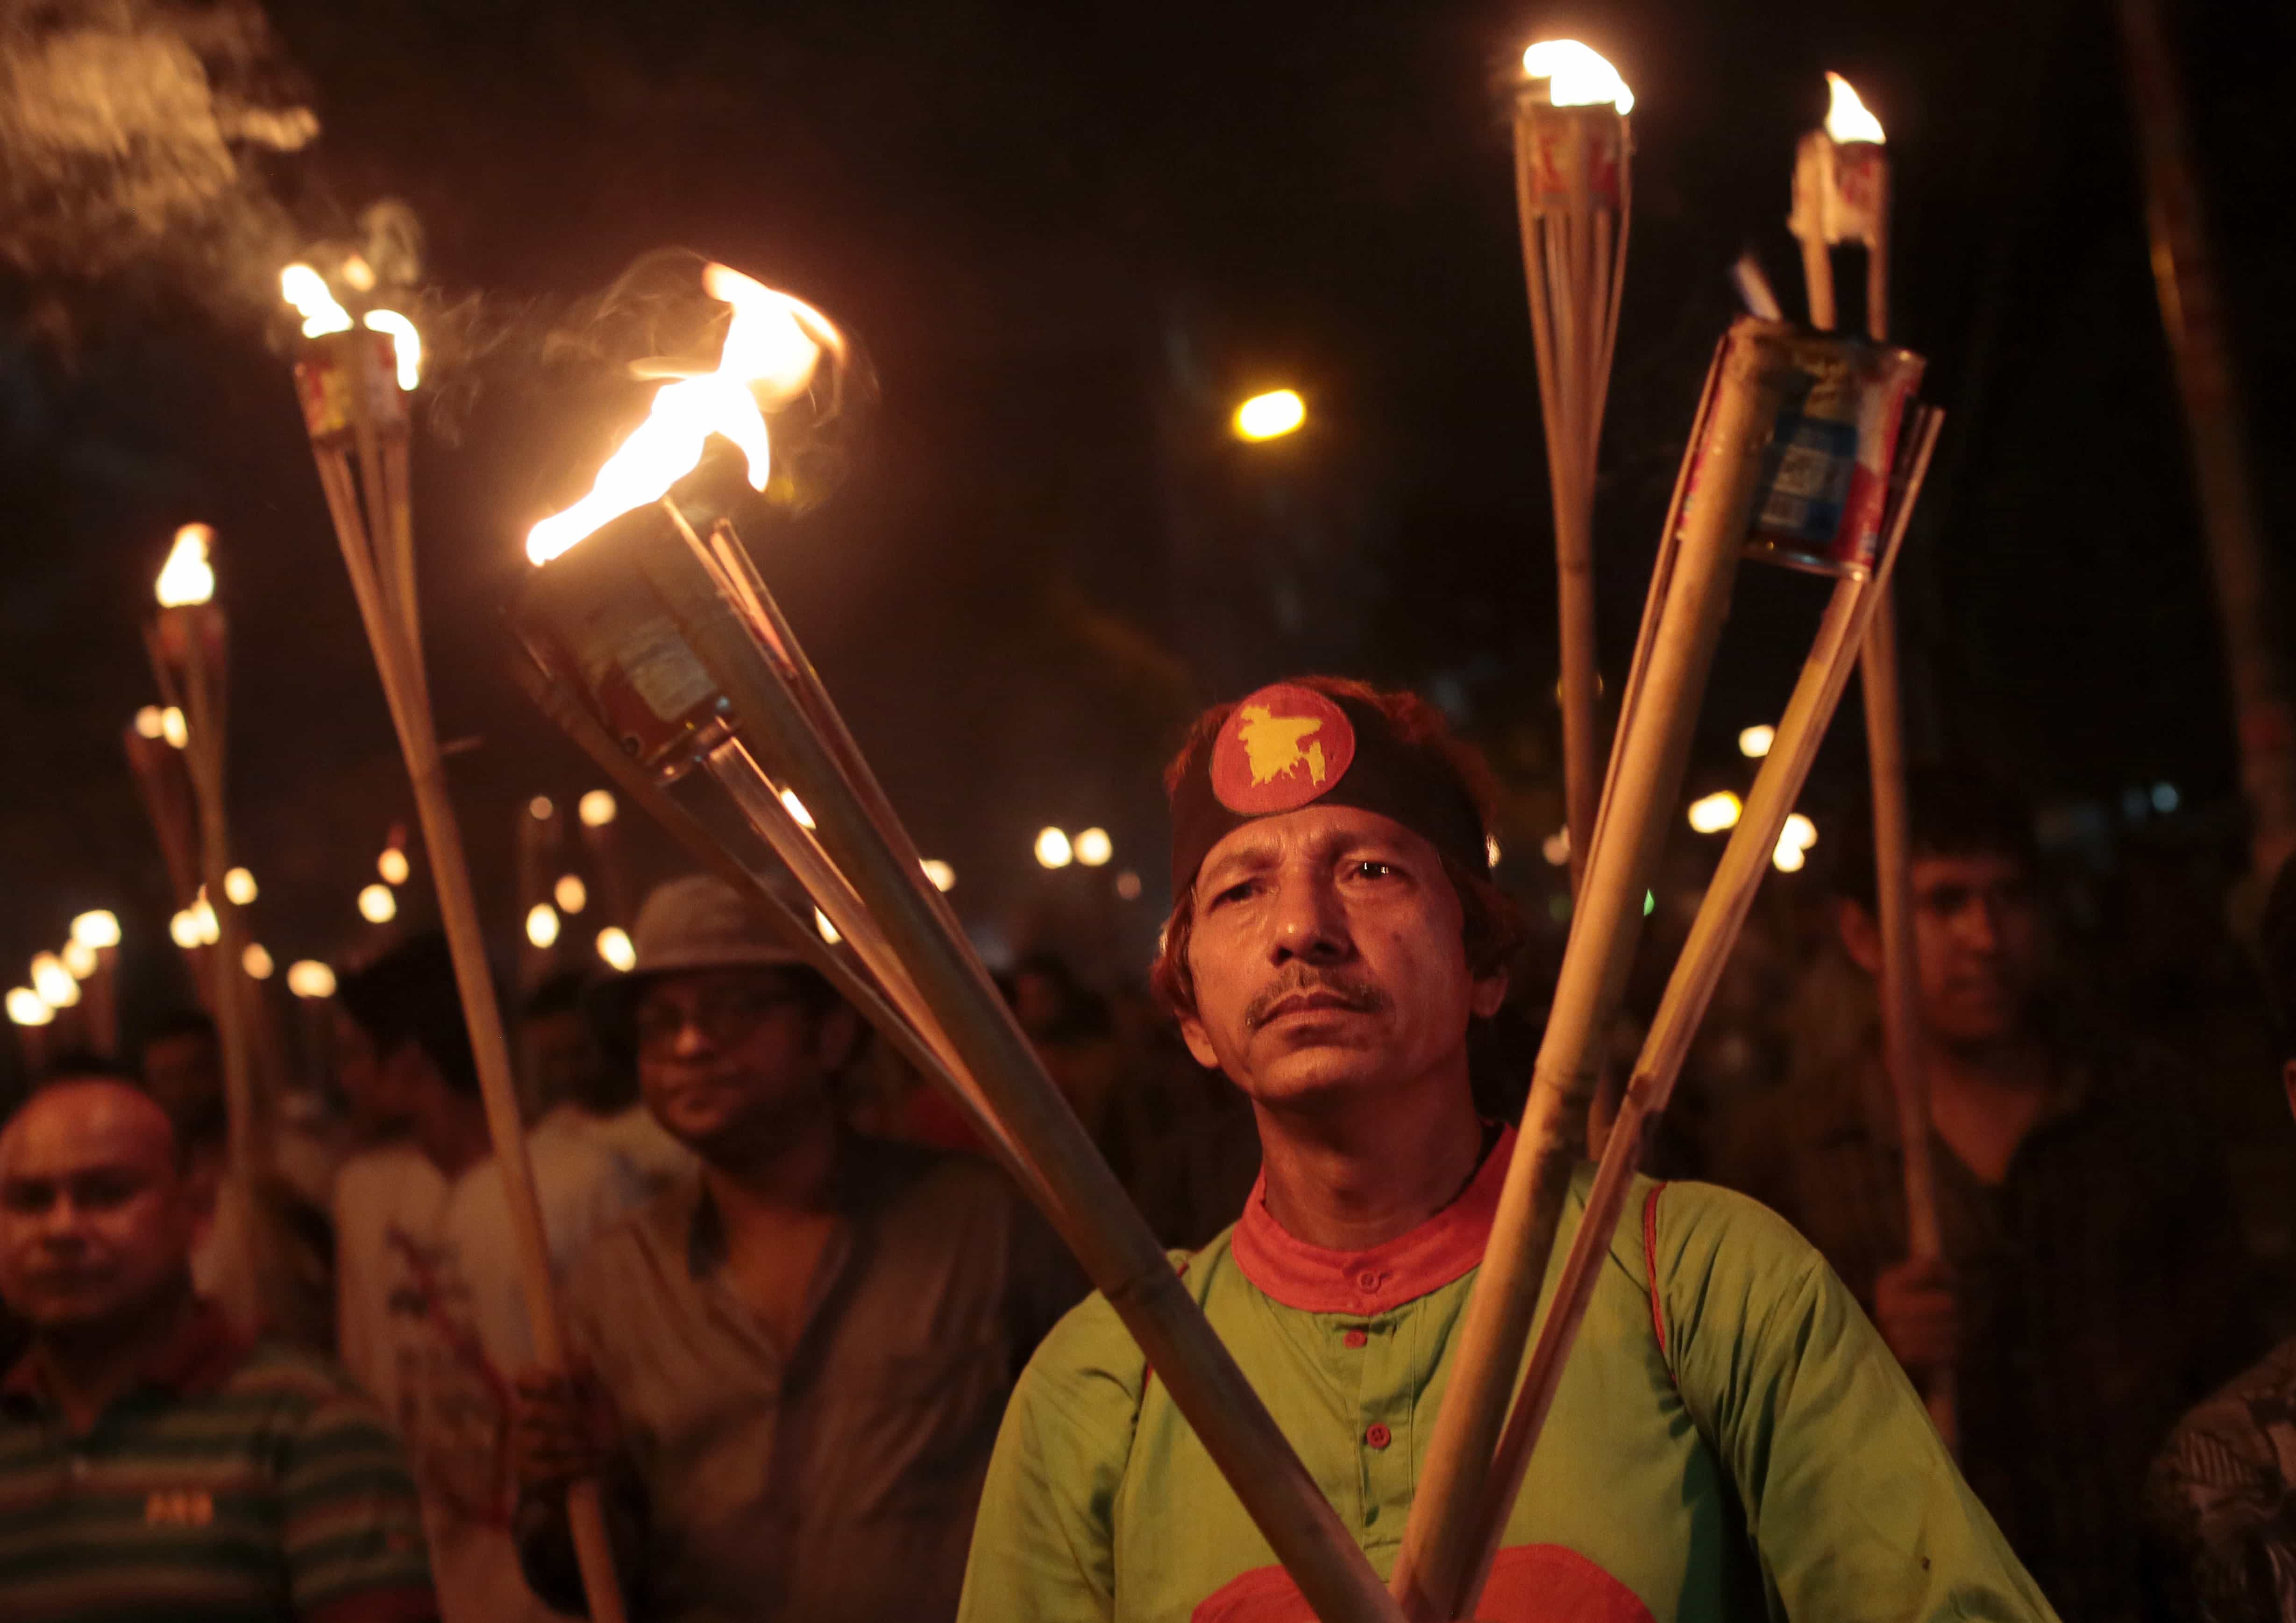 Bangladeshi activists, writers and publishers participate in a torch rally held to protest against the killing of Faisal Arefin Deepan, a publisher of secular books, and the attacks on the other publishers and bloggers in Dhaka, Bangladesh, 2 November 2015, AP Photo/ A.M. Ahad